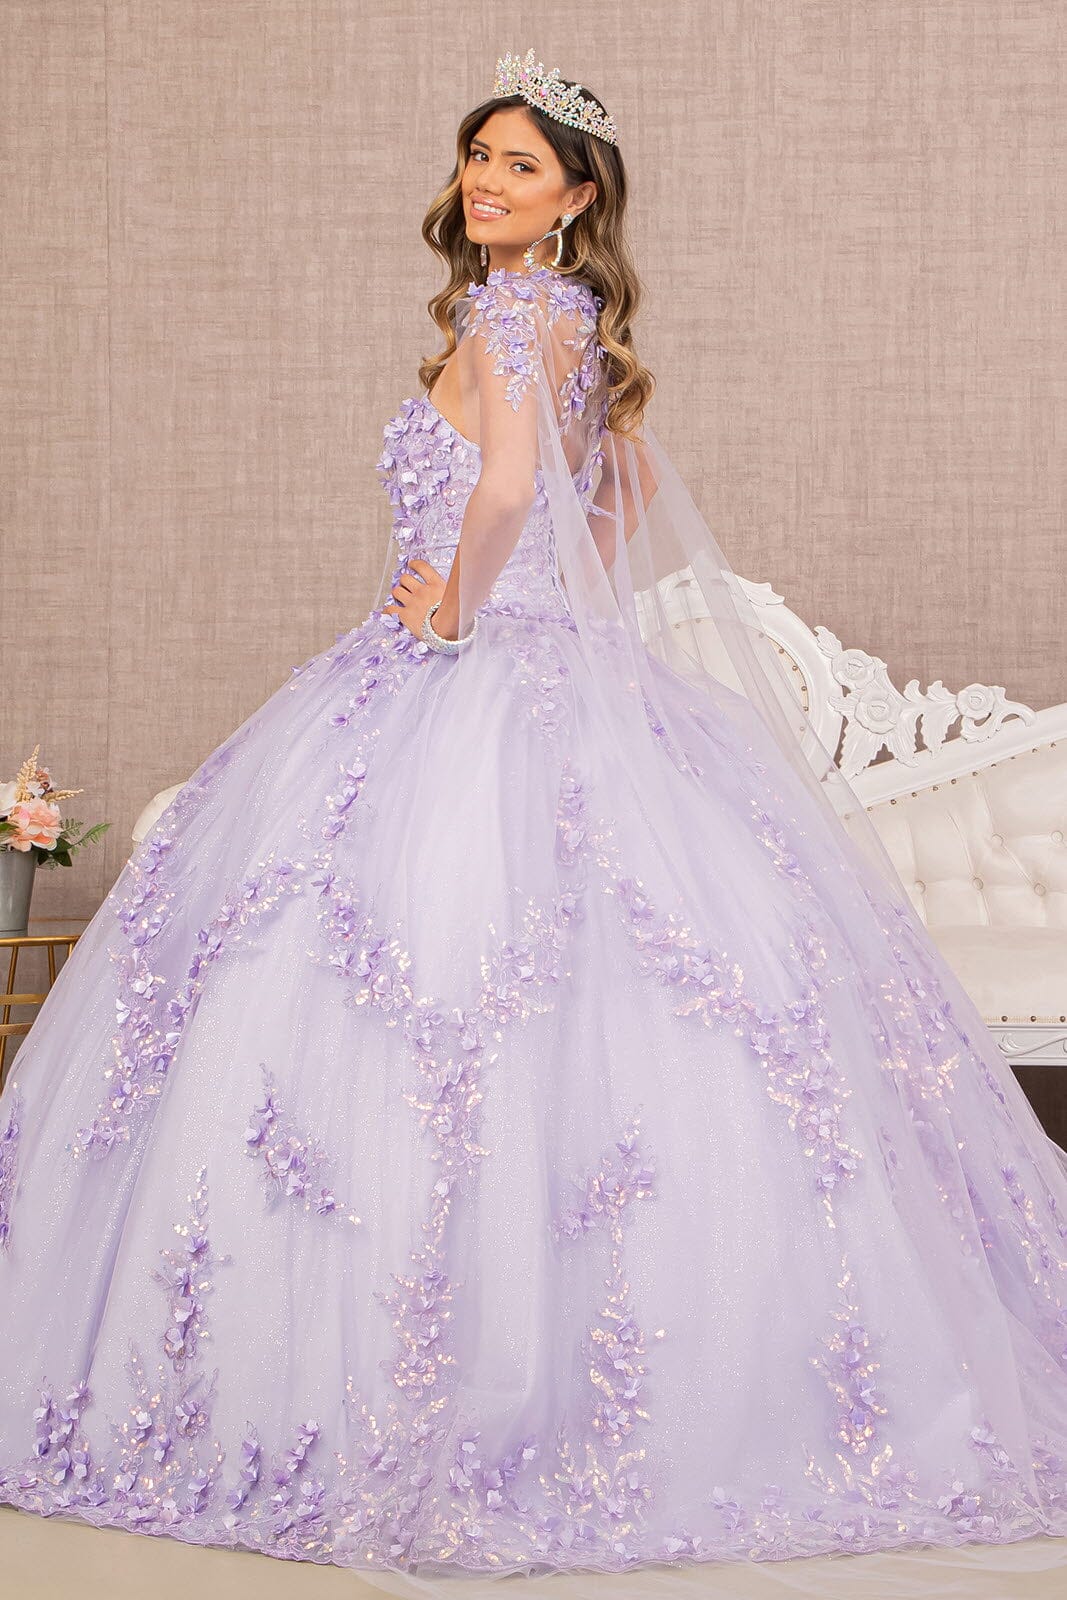 3D Floral Strapless Cape Ball Gown by Elizabeth K GL3103